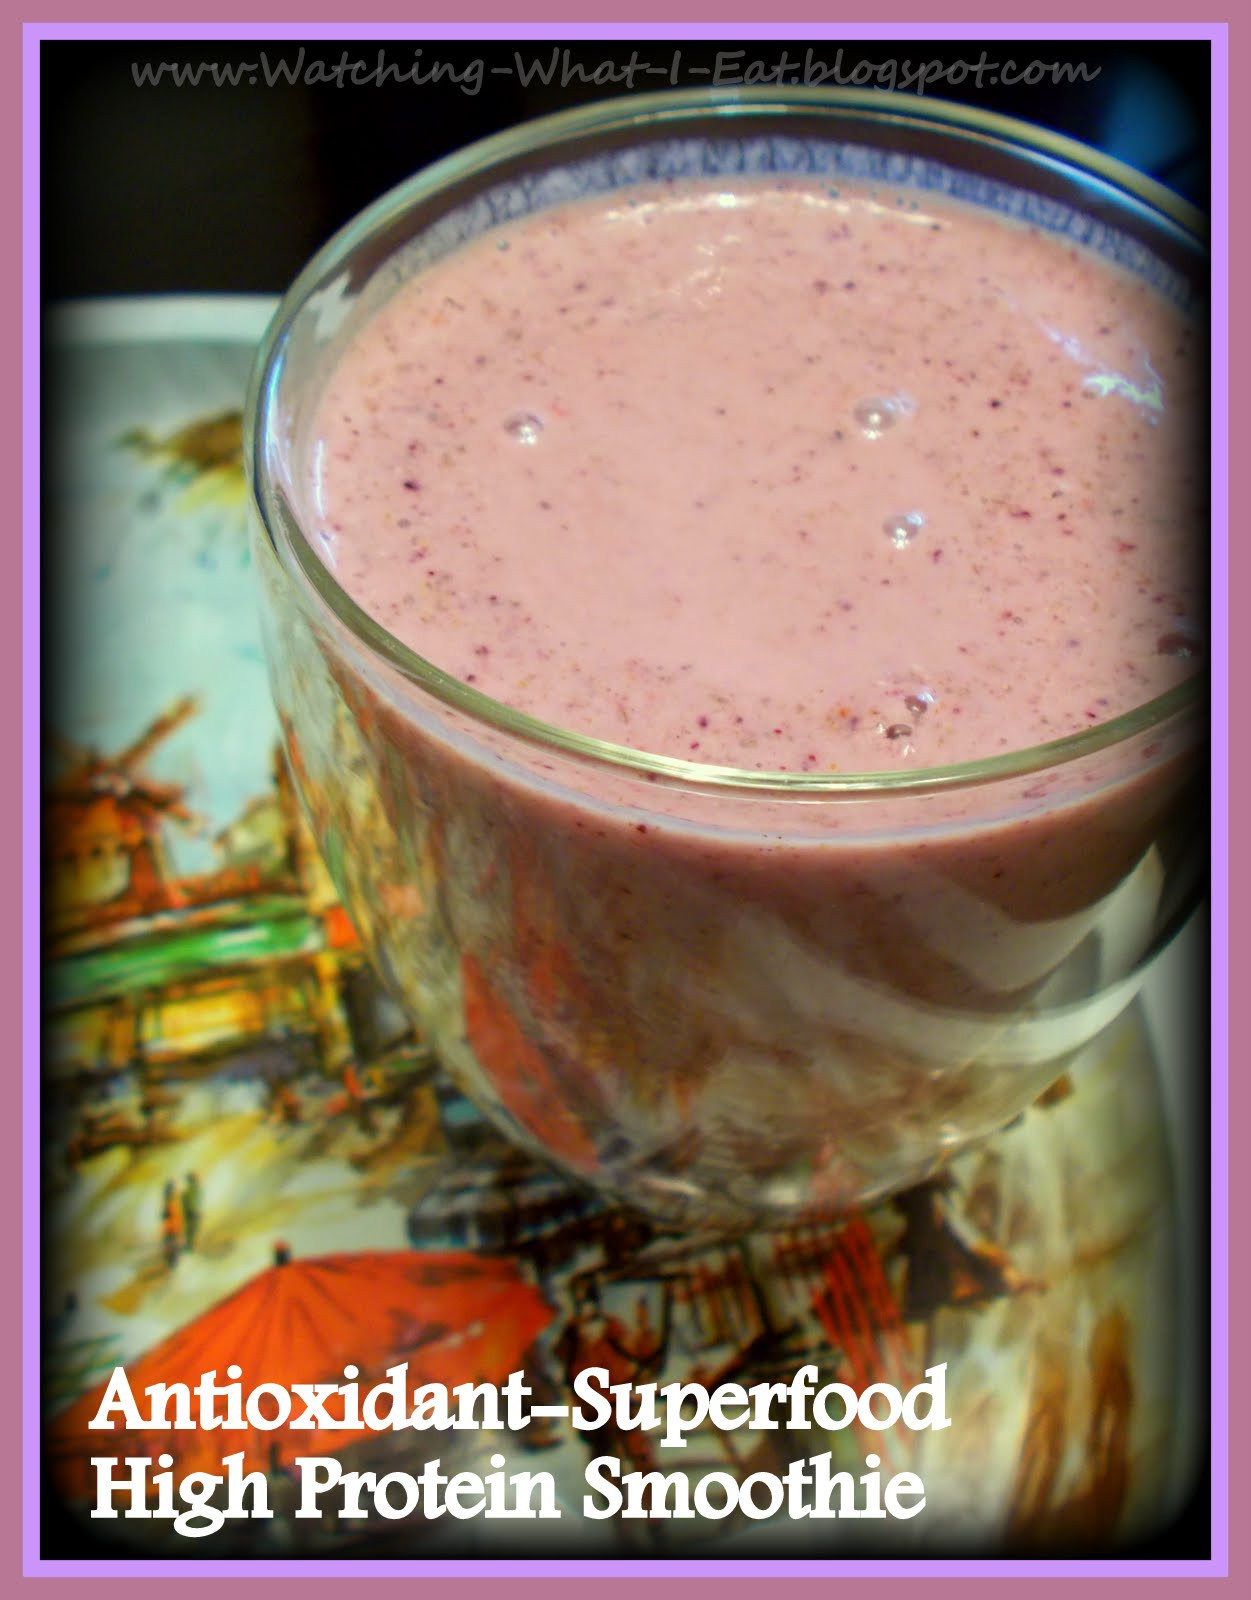 High Protein Smoothies
 Watching What I Eat Antioxidant Superfood High Protein